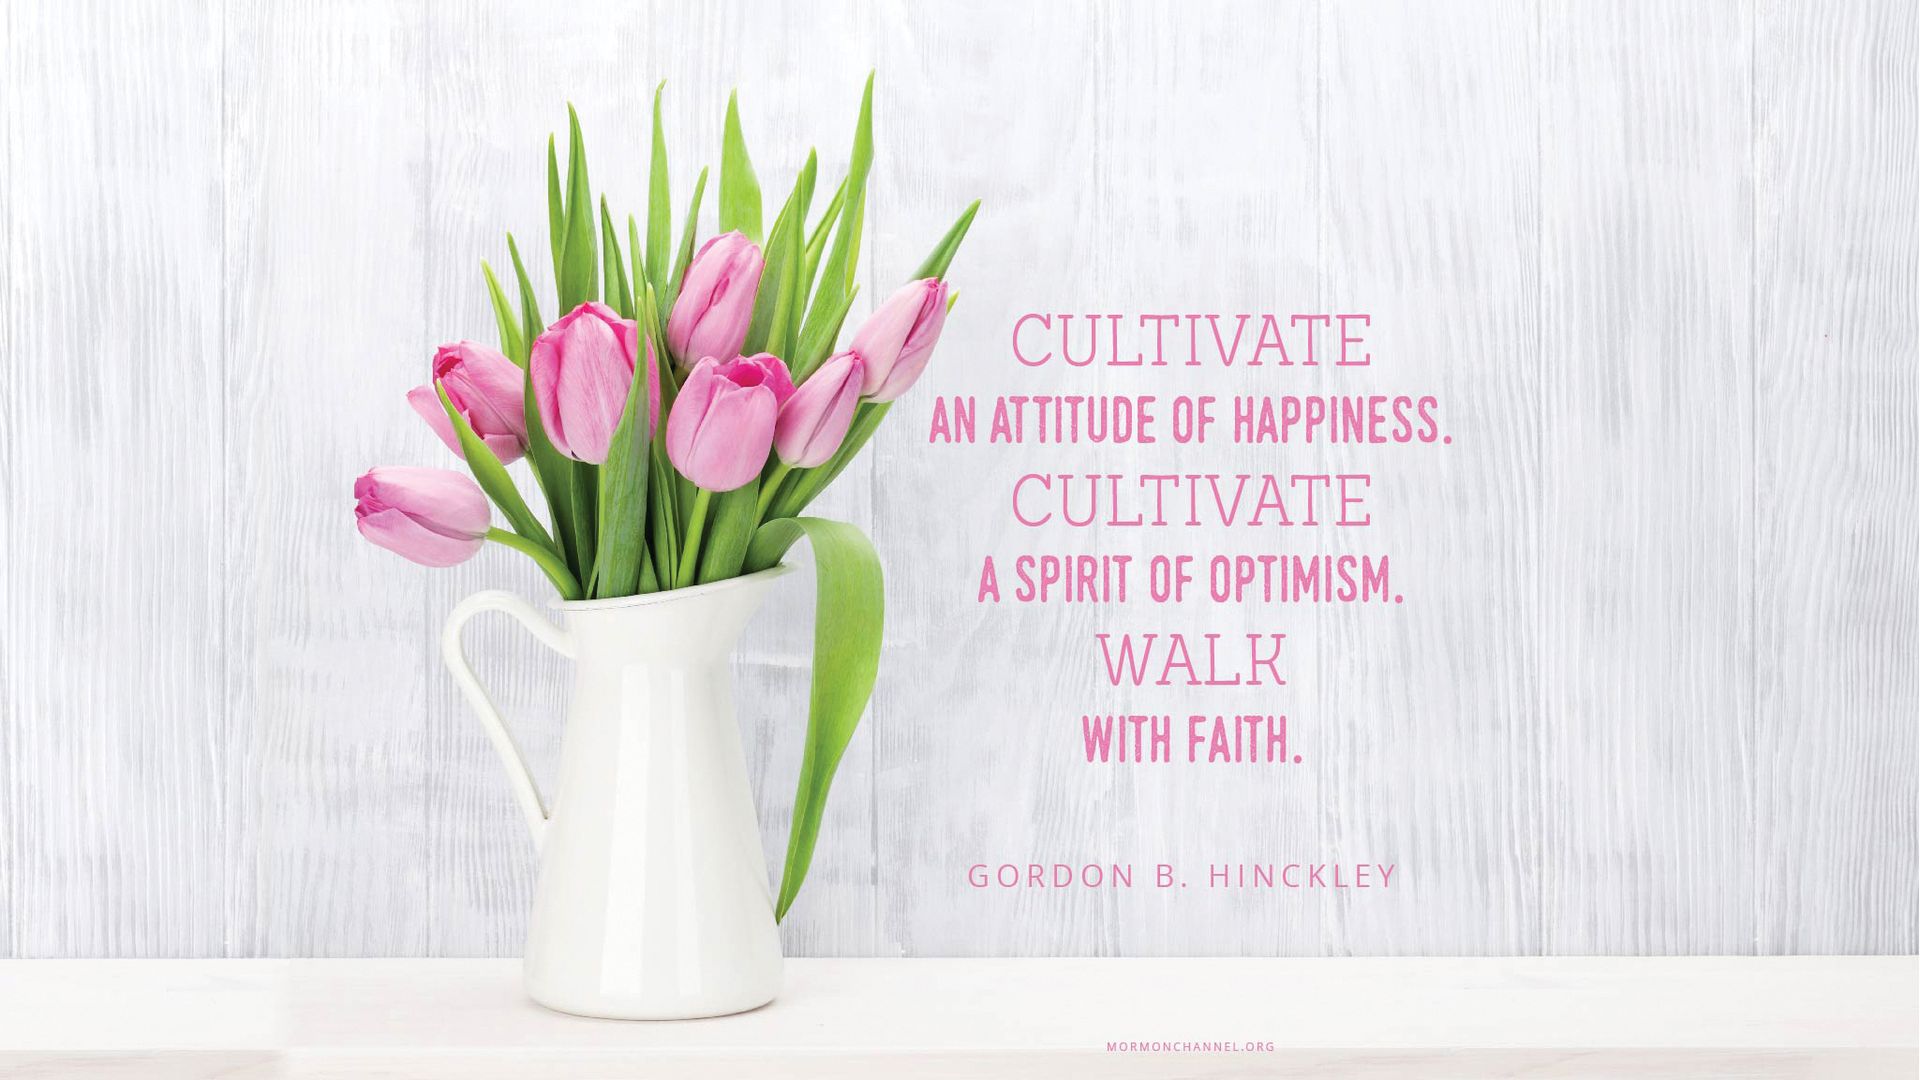 “Cultivate an attitude of happiness. Cultivate a spirit of optimism. Walk with faith.”—President Gordon B. Hinckley, “The Spirit of Optimism”